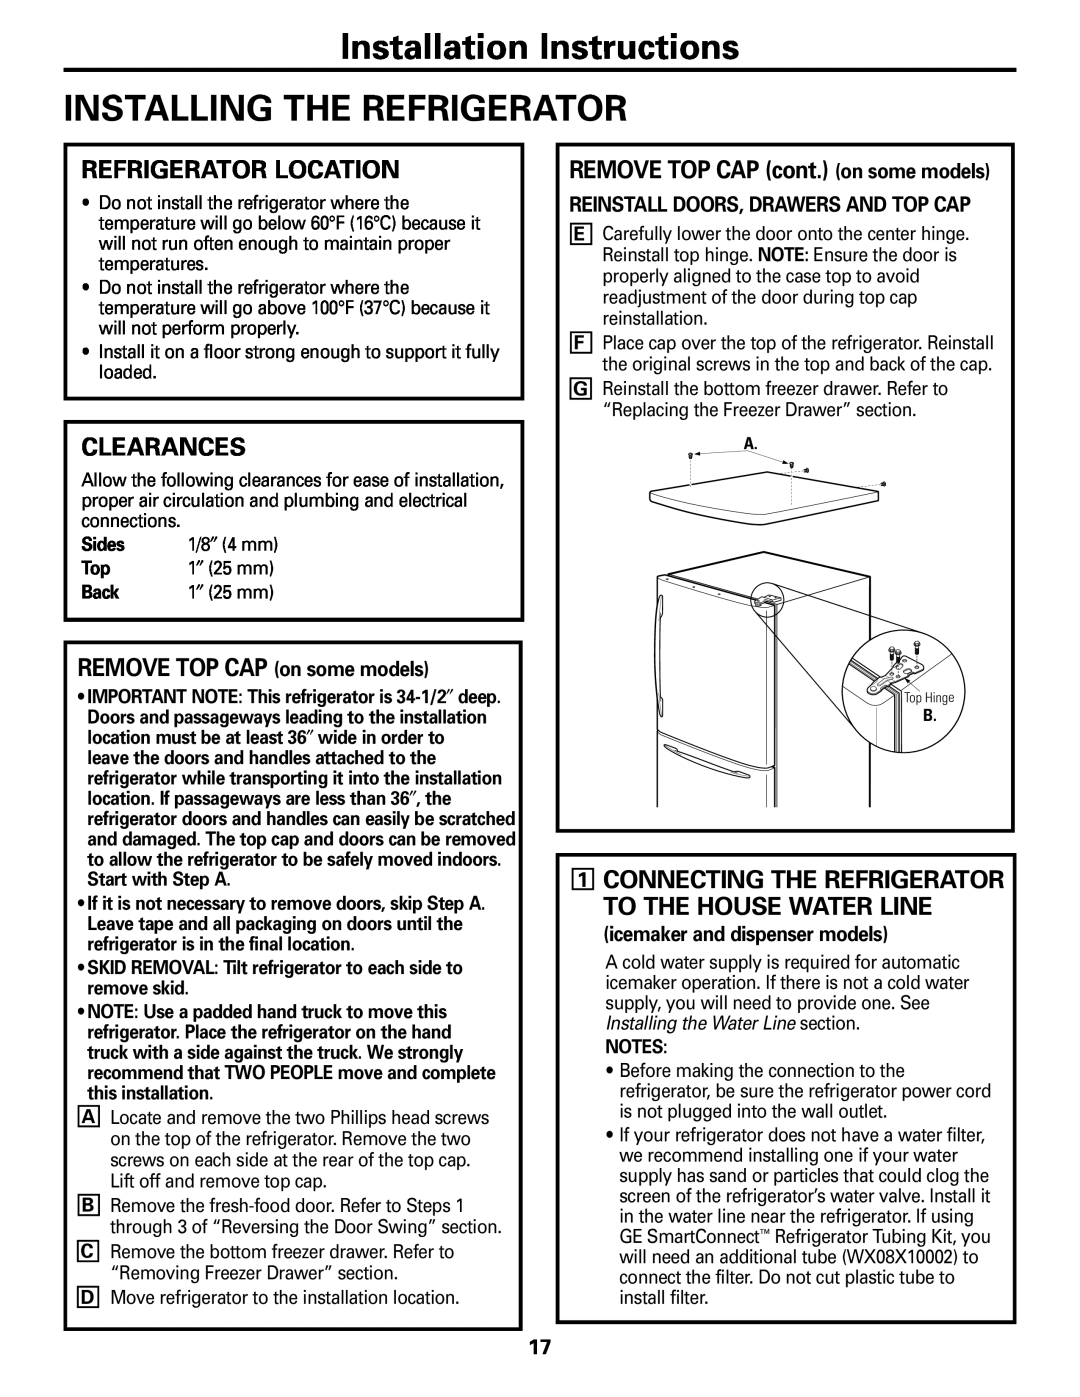 GE 197D4618P003 Installation Instructions INSTALLING THE REFRIGERATOR, Refrigerator Location, Clearances, Sides, Back 